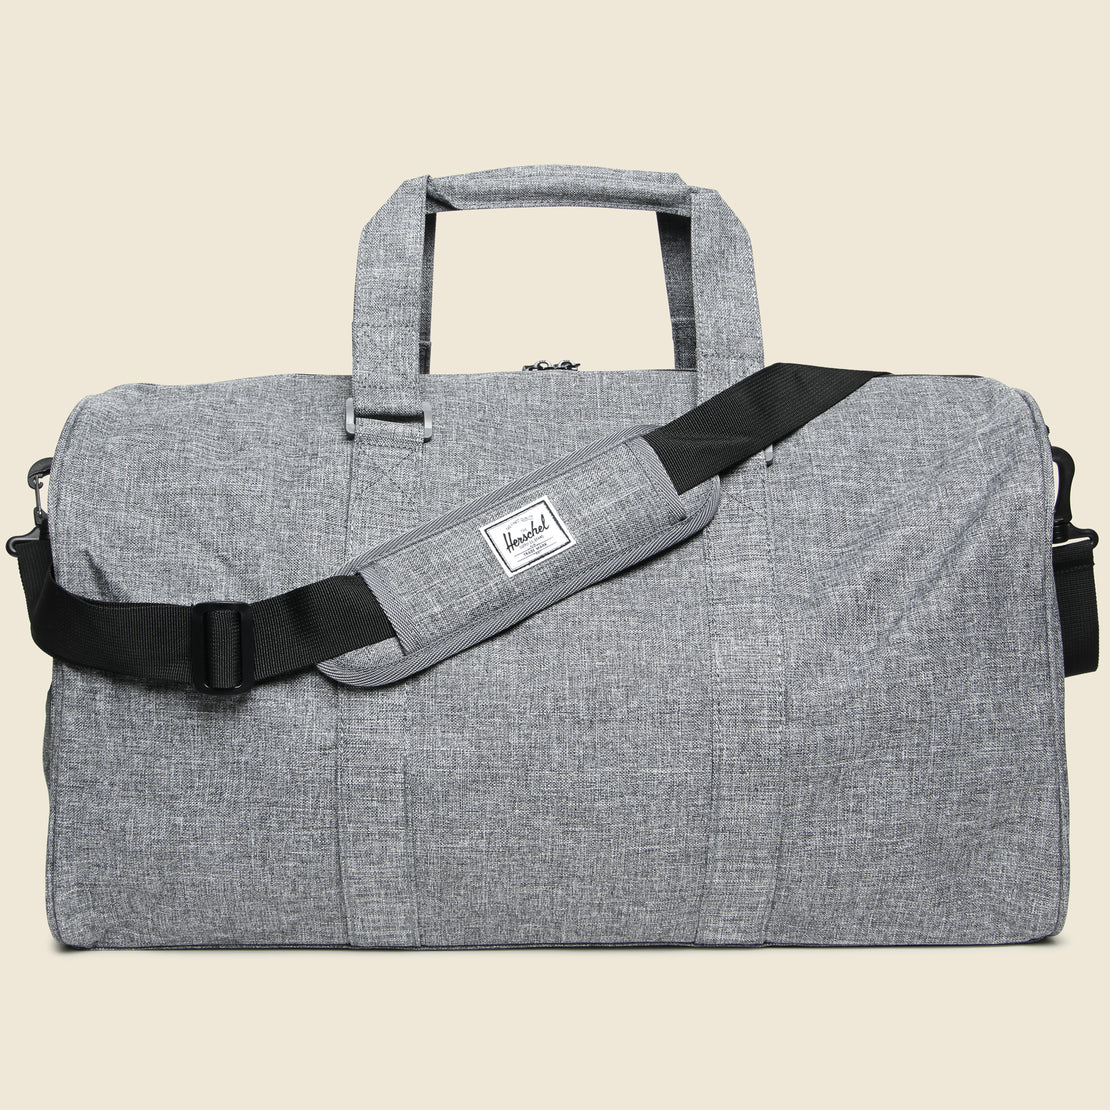 Novel Duffle - Raven - Herschel Supply Co - STAG Provisions - Accessories - Bags / Luggage